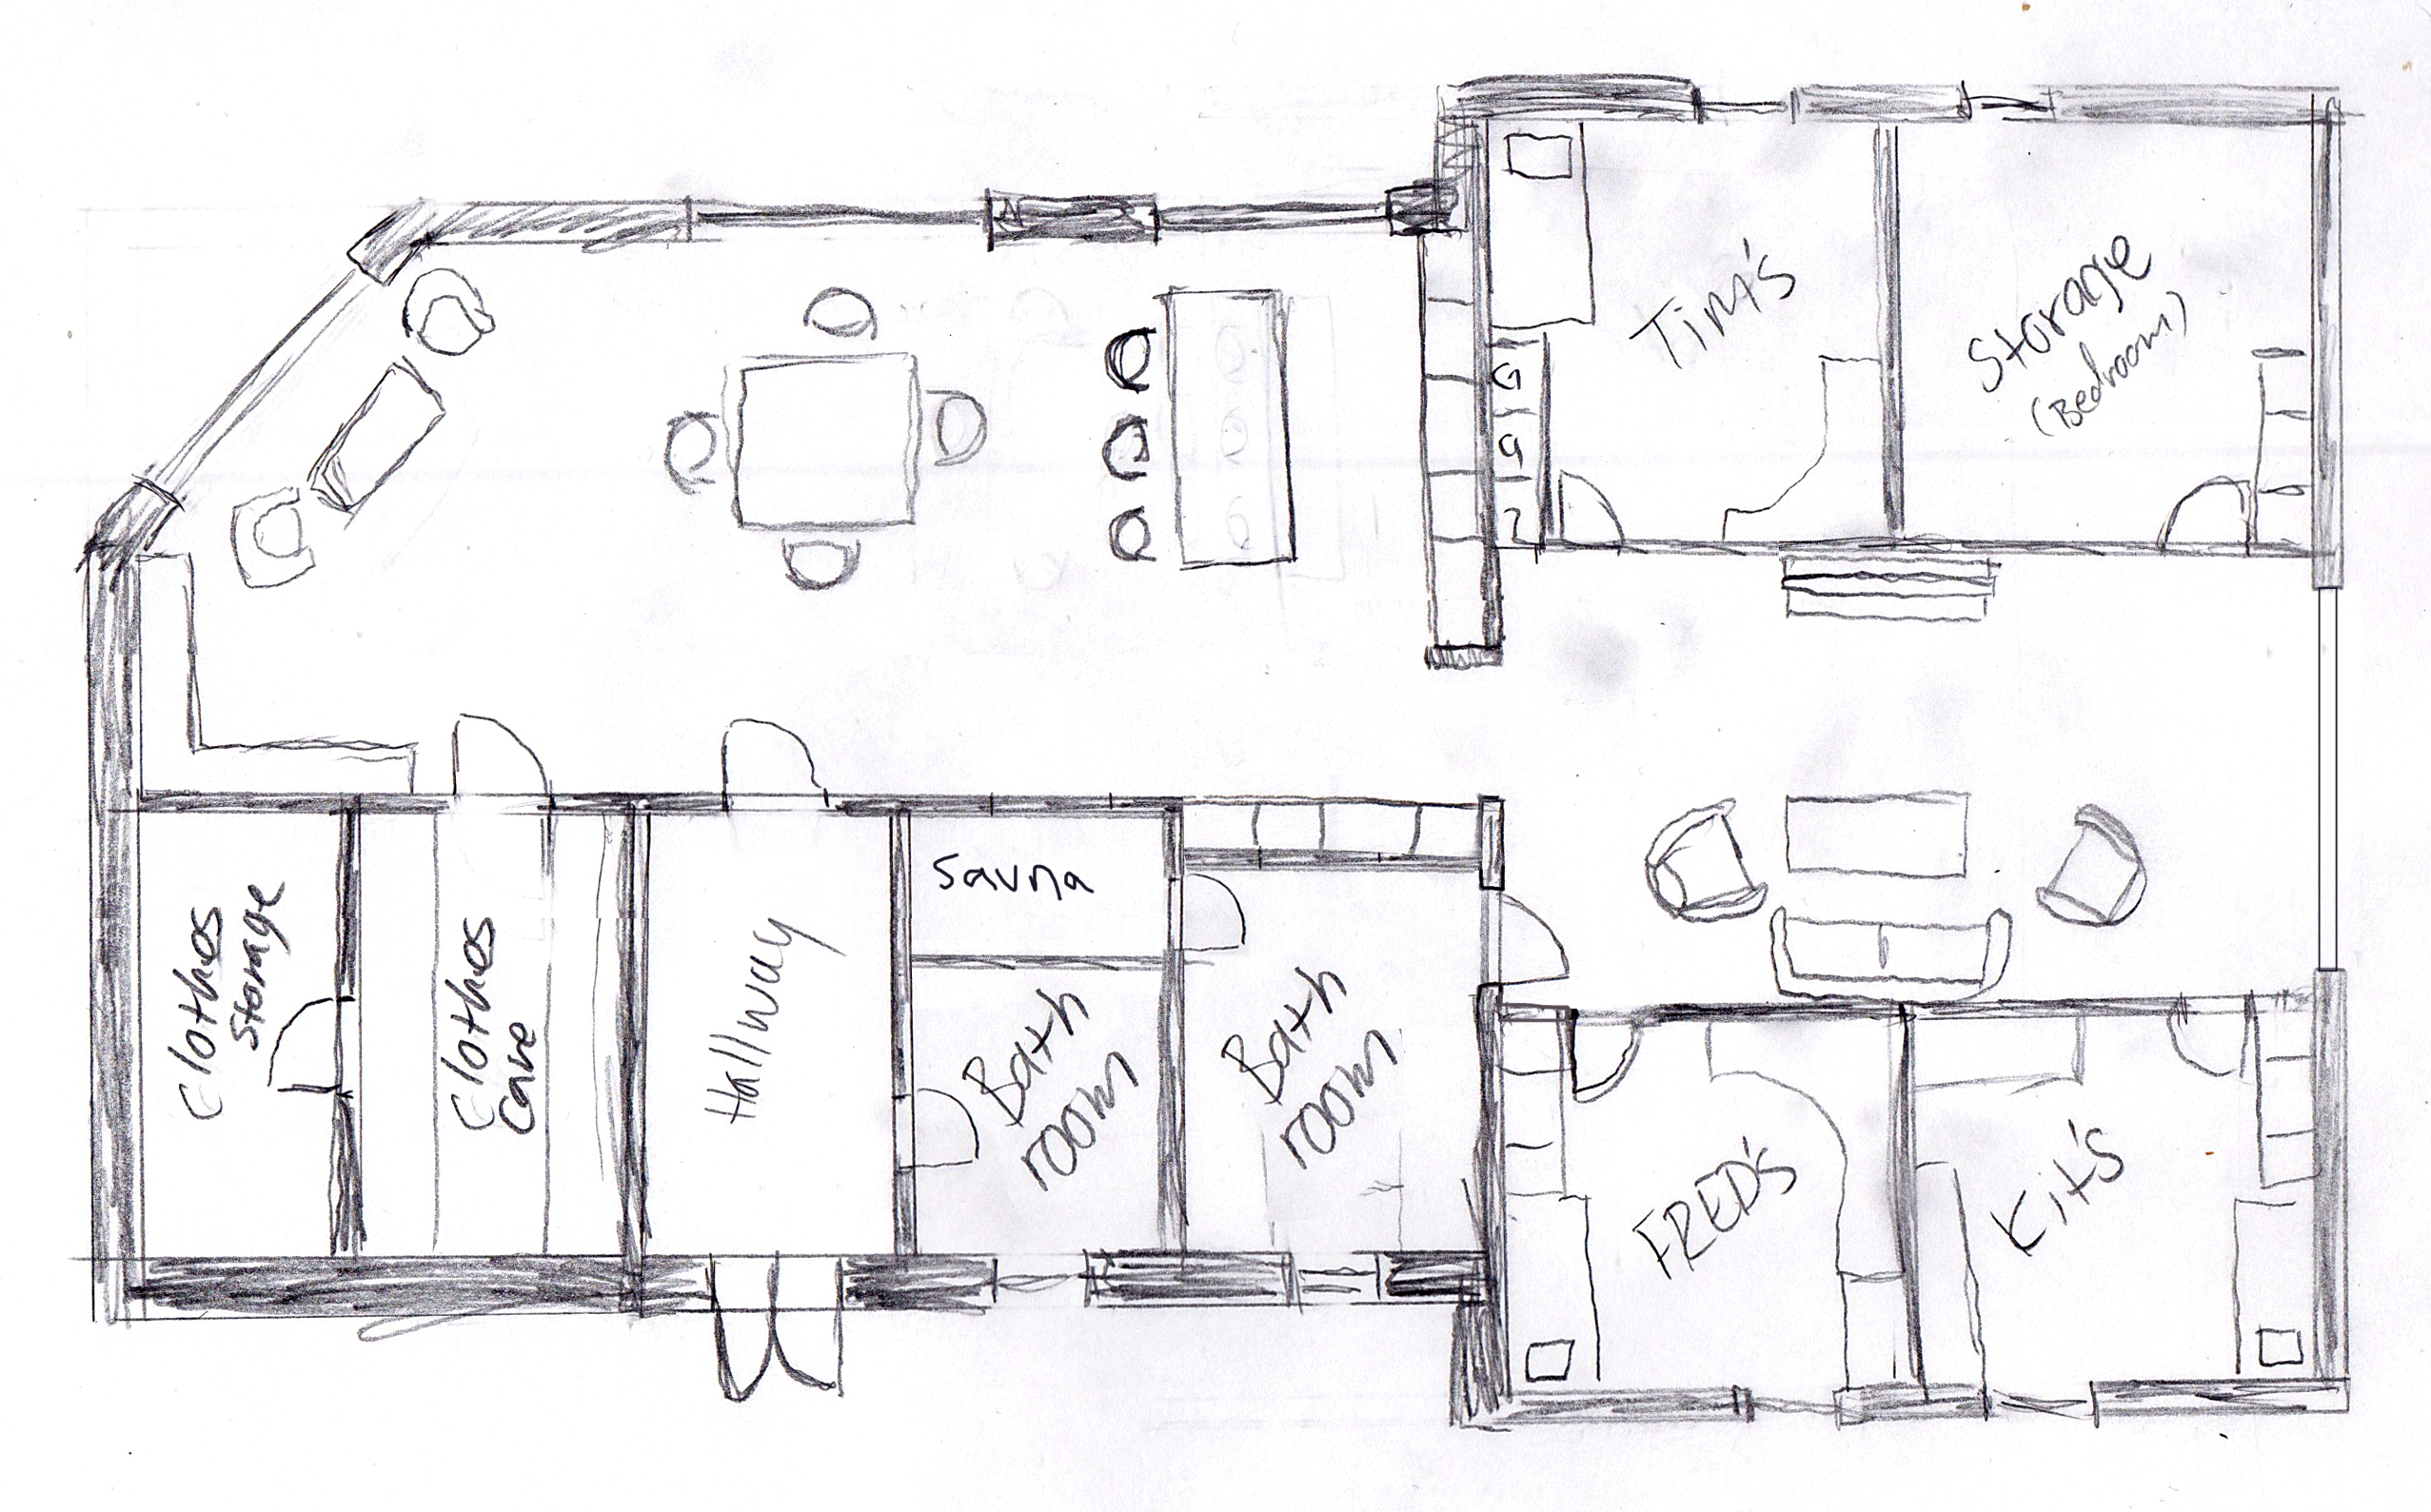 A rough sketch of Kit's house